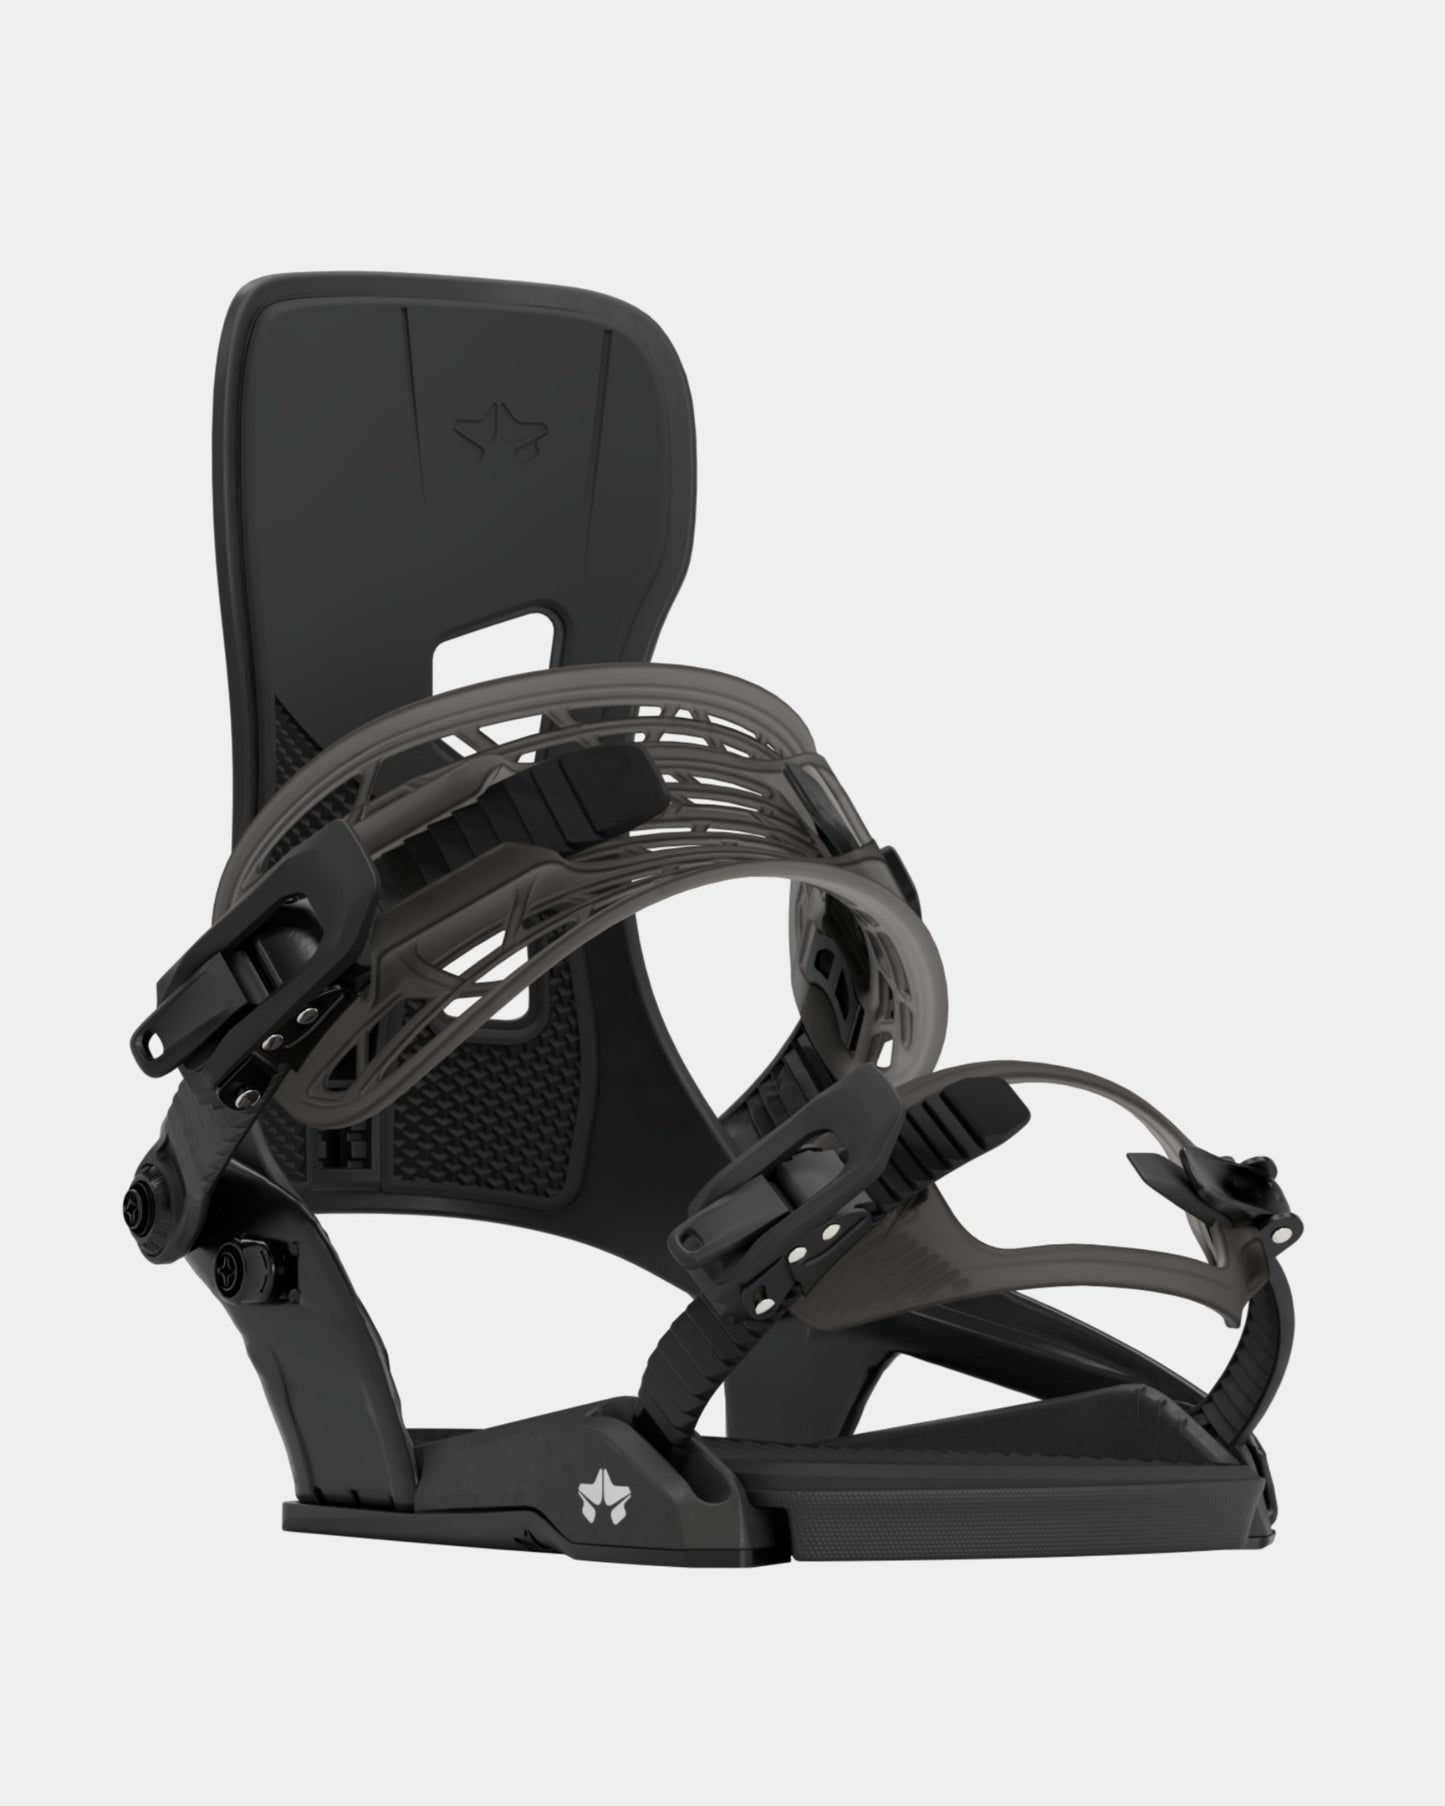 Rome Crux 2022 mens snowboard bindings product photo from the front cover shot in the studio color black